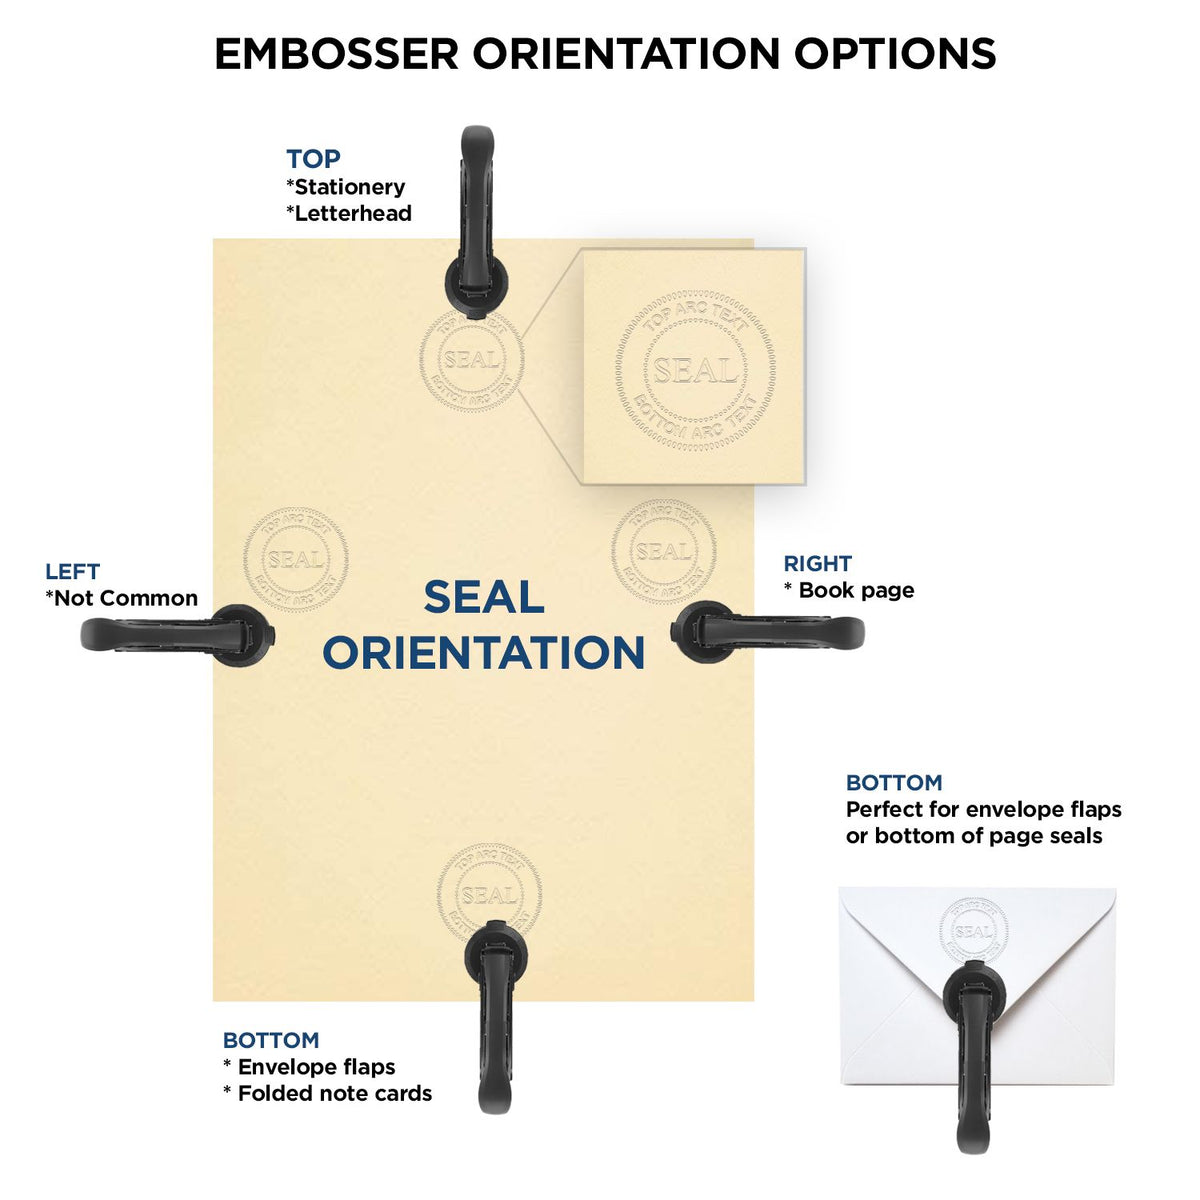 An infographic for the Gift Maryland Engineer Seal showing embosser orientation, this is showing examples of a top, bottom, right and left insert.